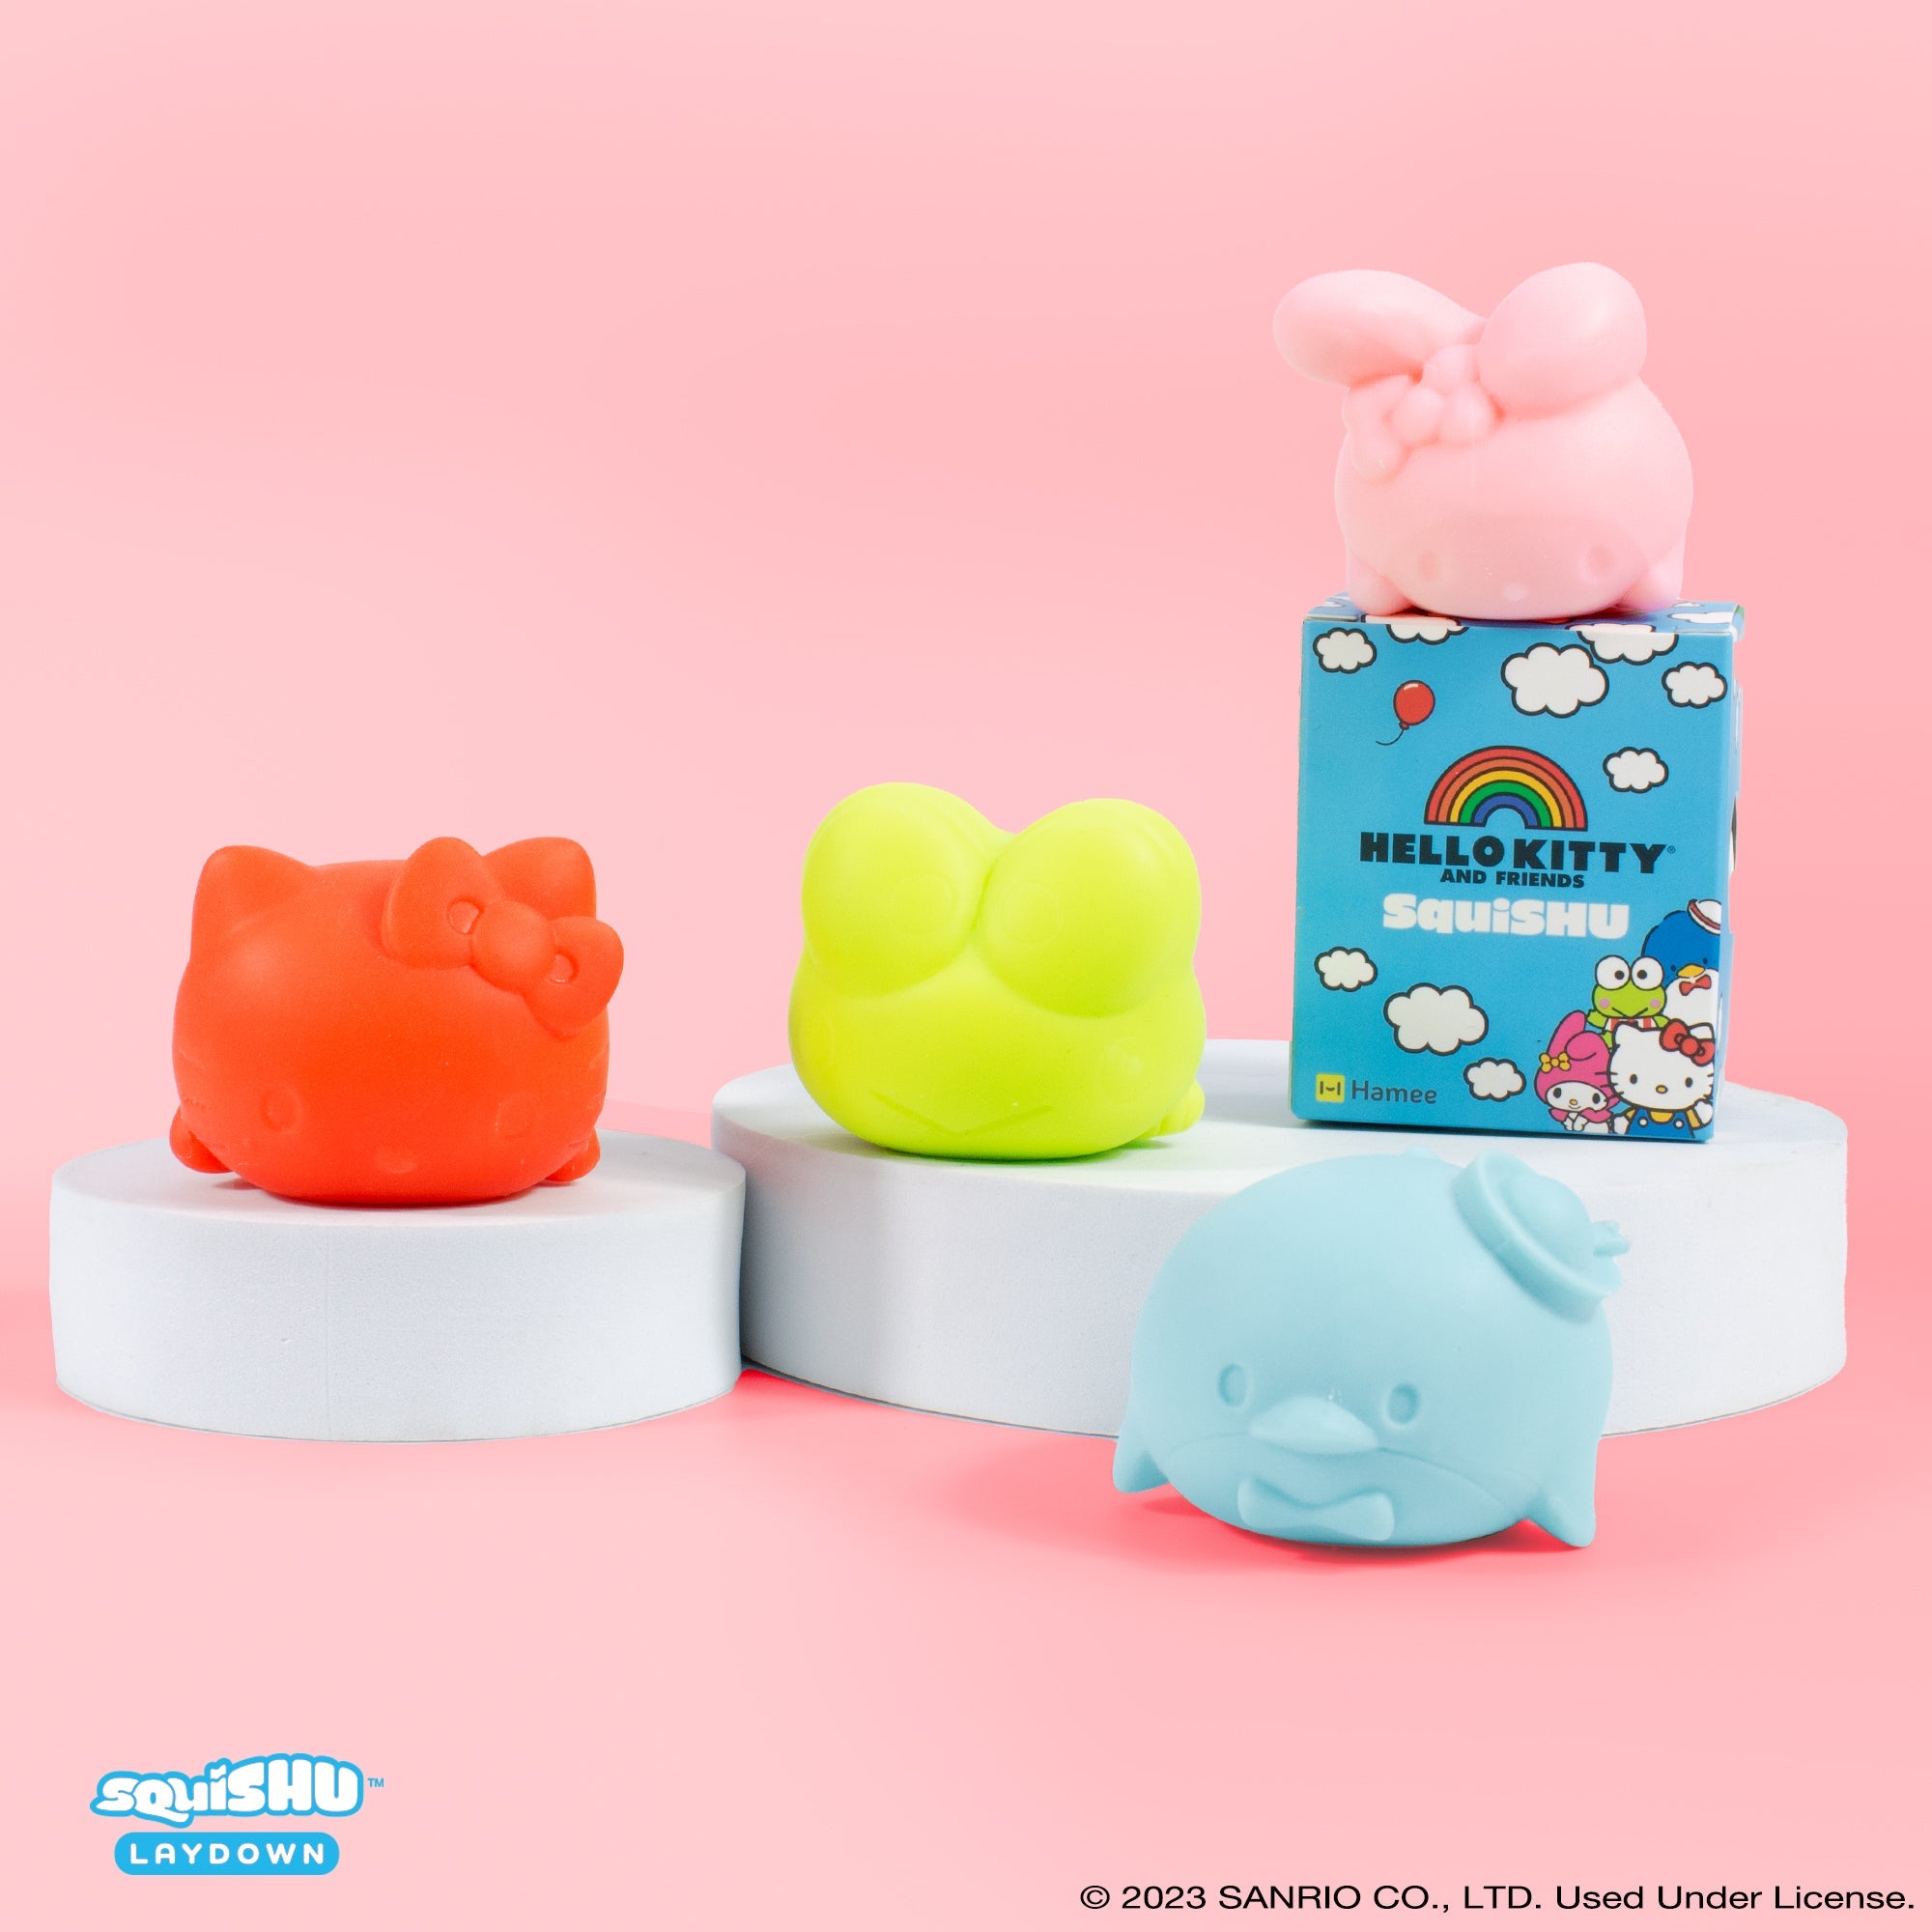 Hello Kitty and Friends Squishy Toy Squishy Hamee.com - Hamee US Hello Kitty  